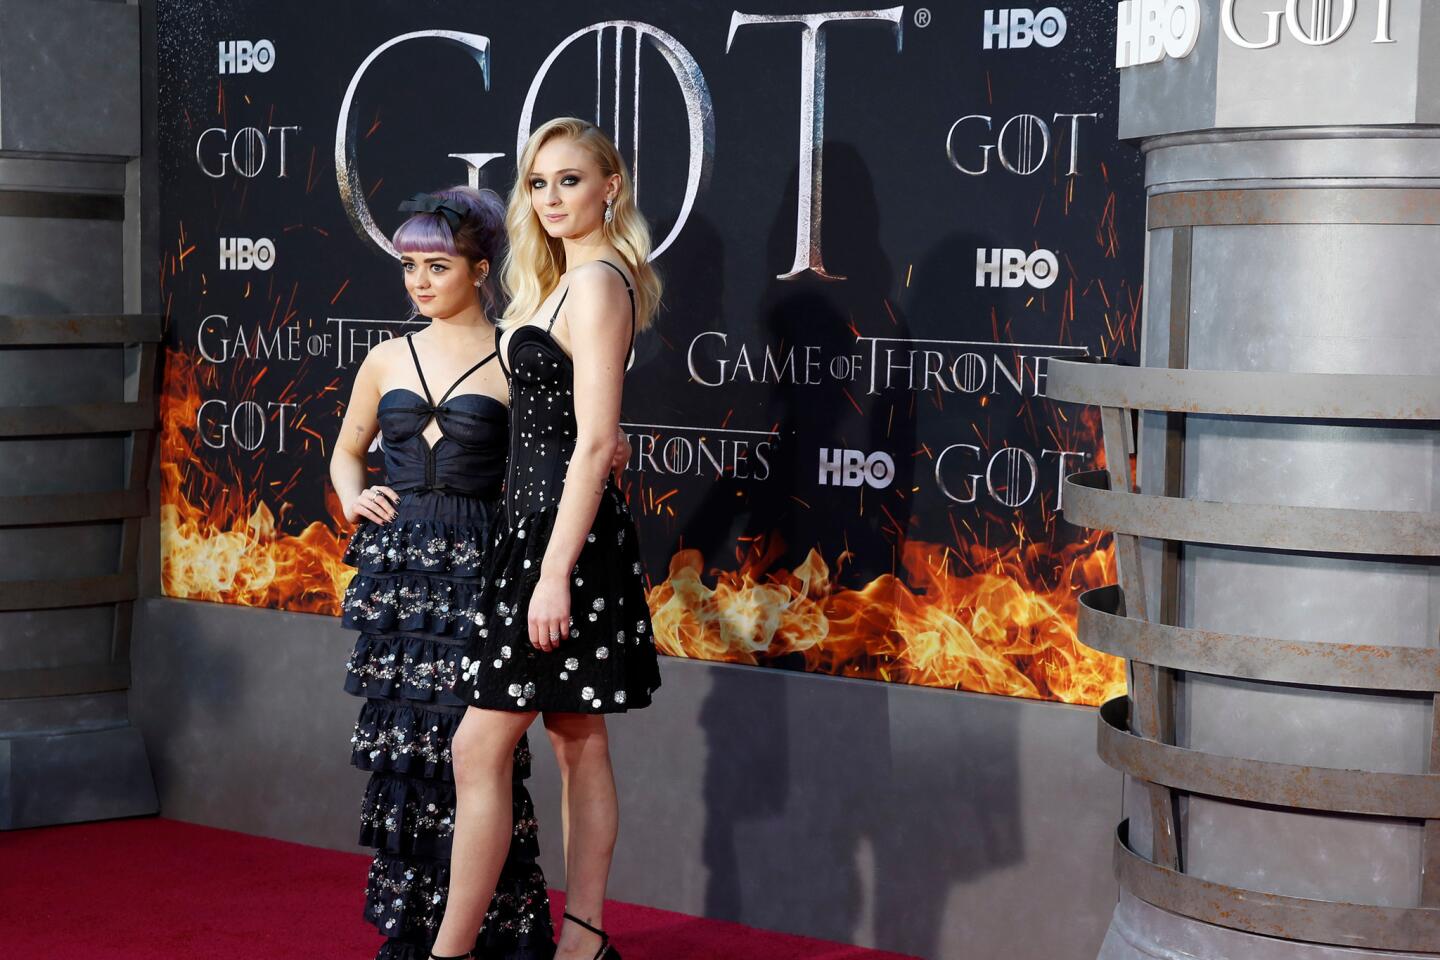 Game of Thrones' premiere, final trailer arrive